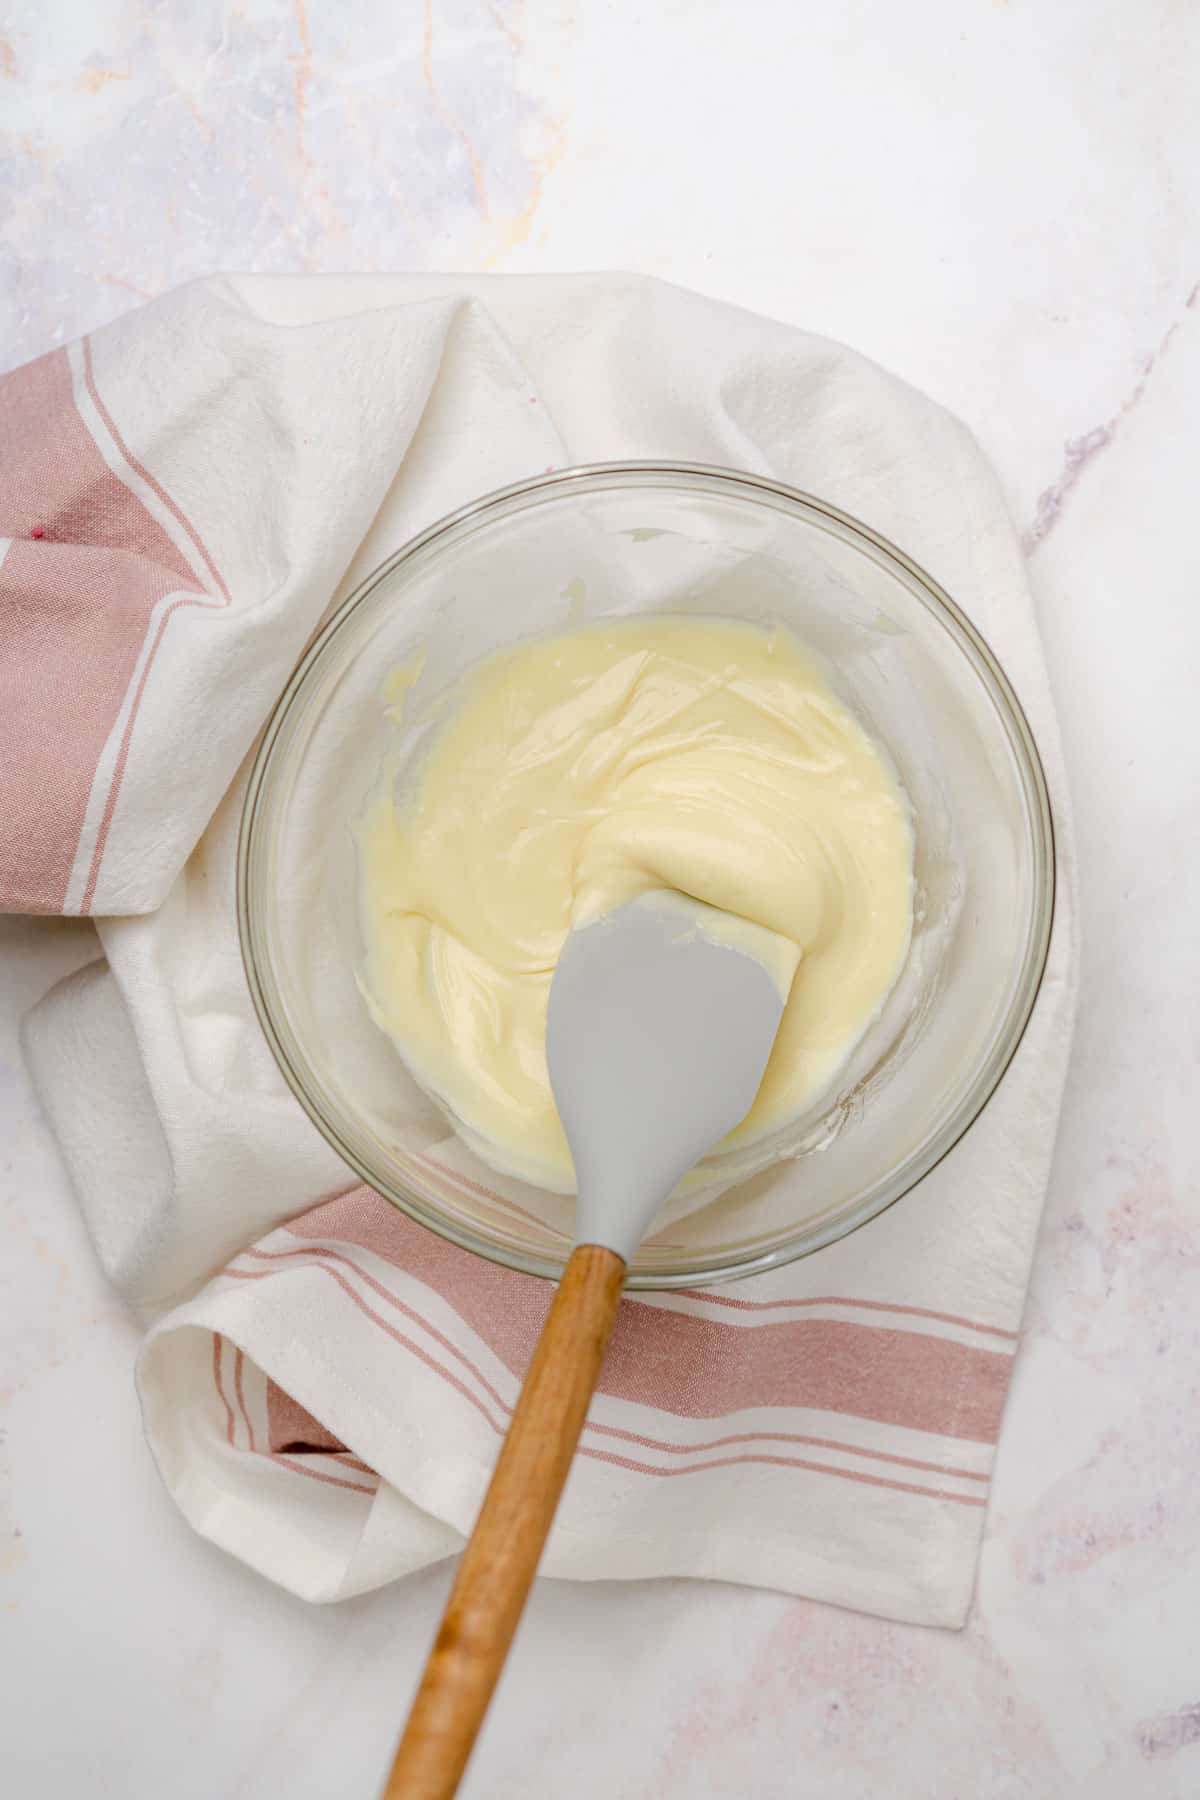 melted white chocolate chips in a glass bowl being stirred with a rubber spatula